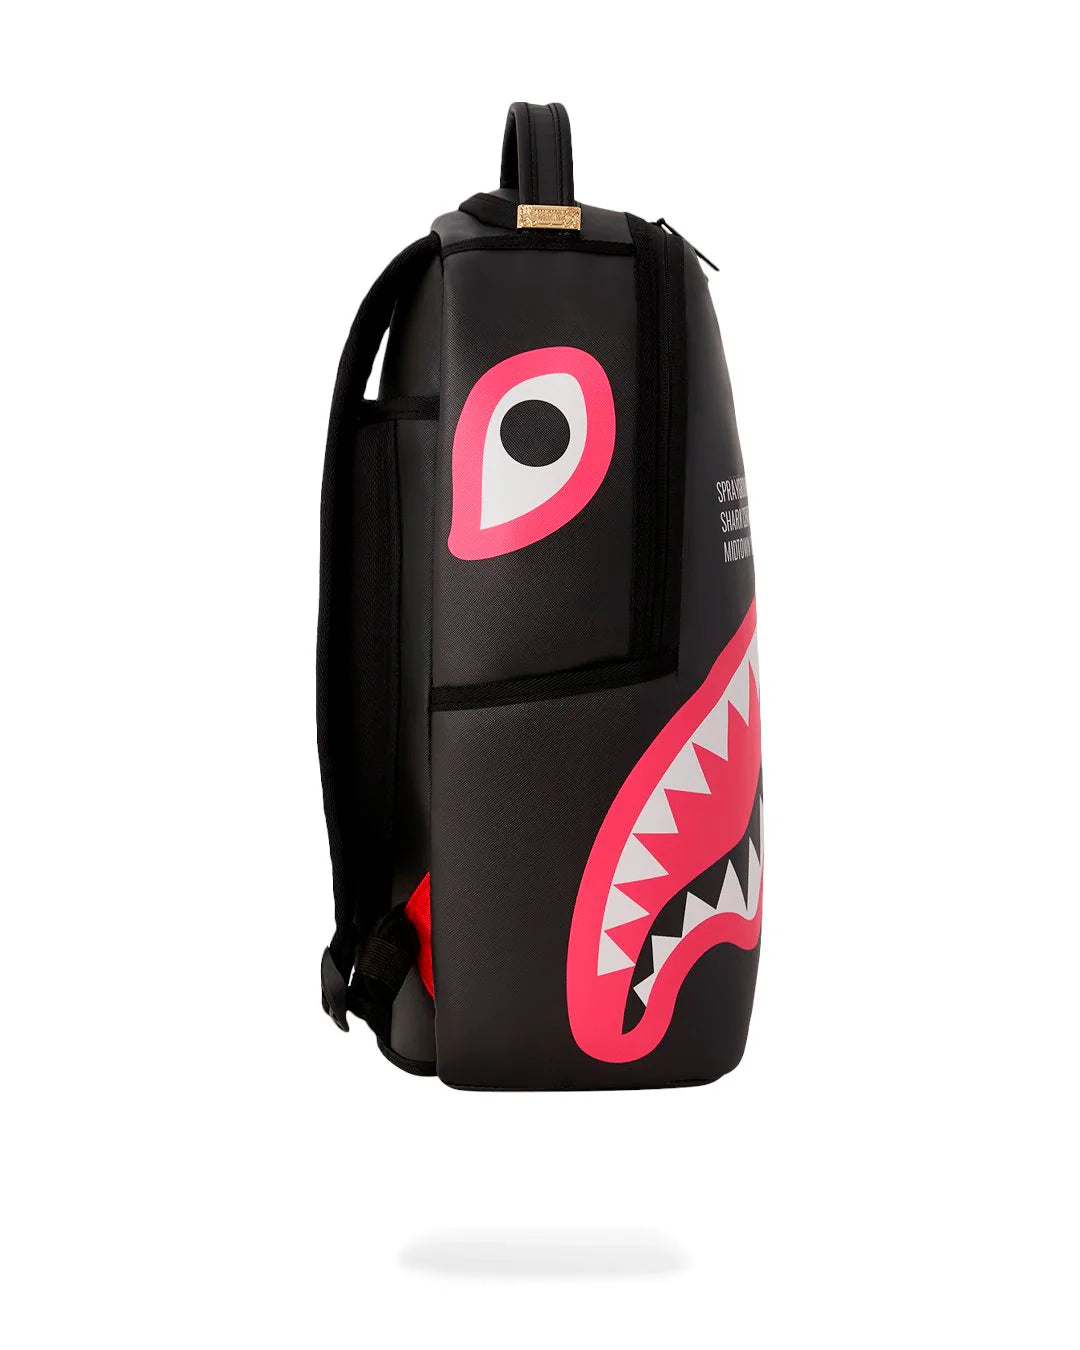 Sprayground CENTRAL SOLID GREY WITH PINK SHARK MOUTH/ SHARK CENTRAL BLACK CHECKER SHARK MOUTH BACKPACK